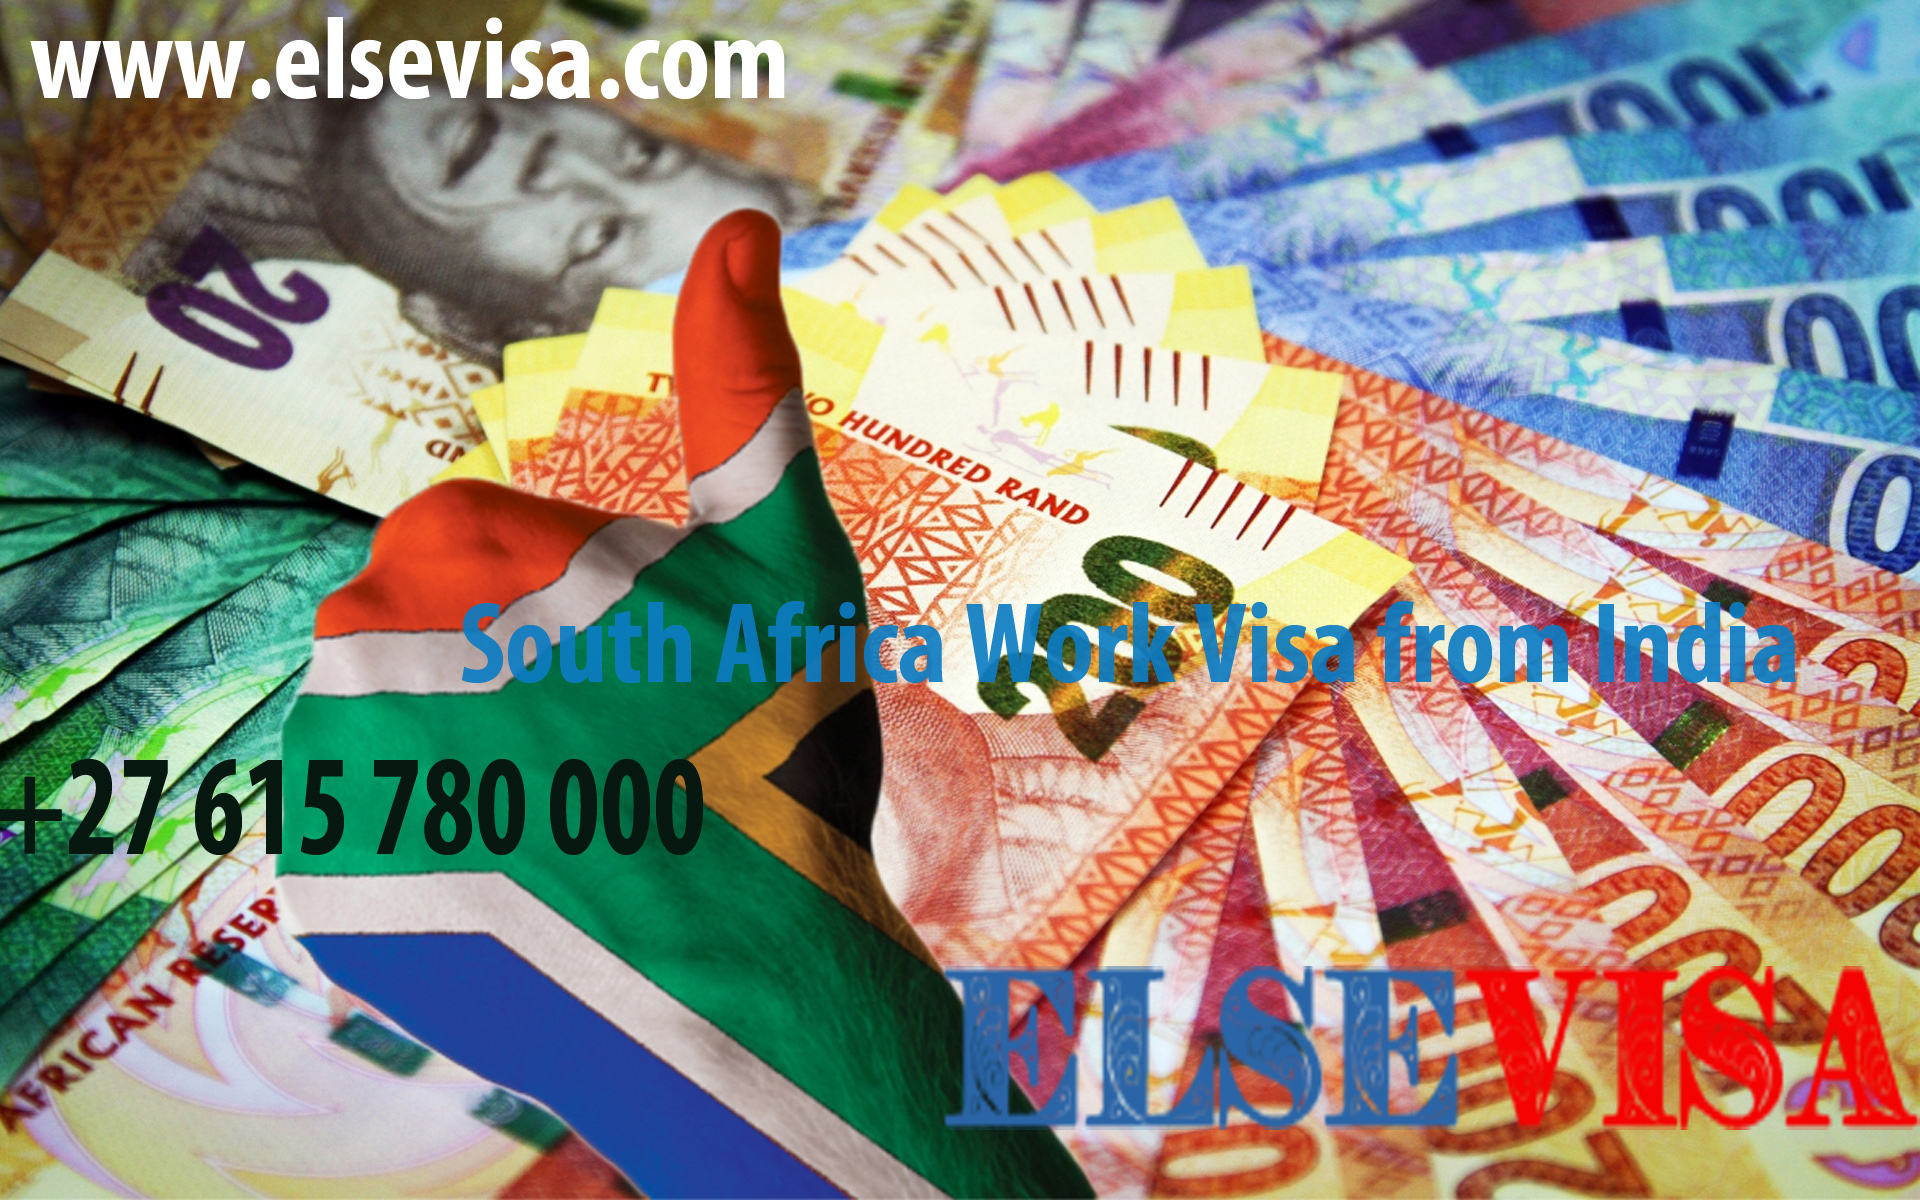 South Africa critical skills visa from India